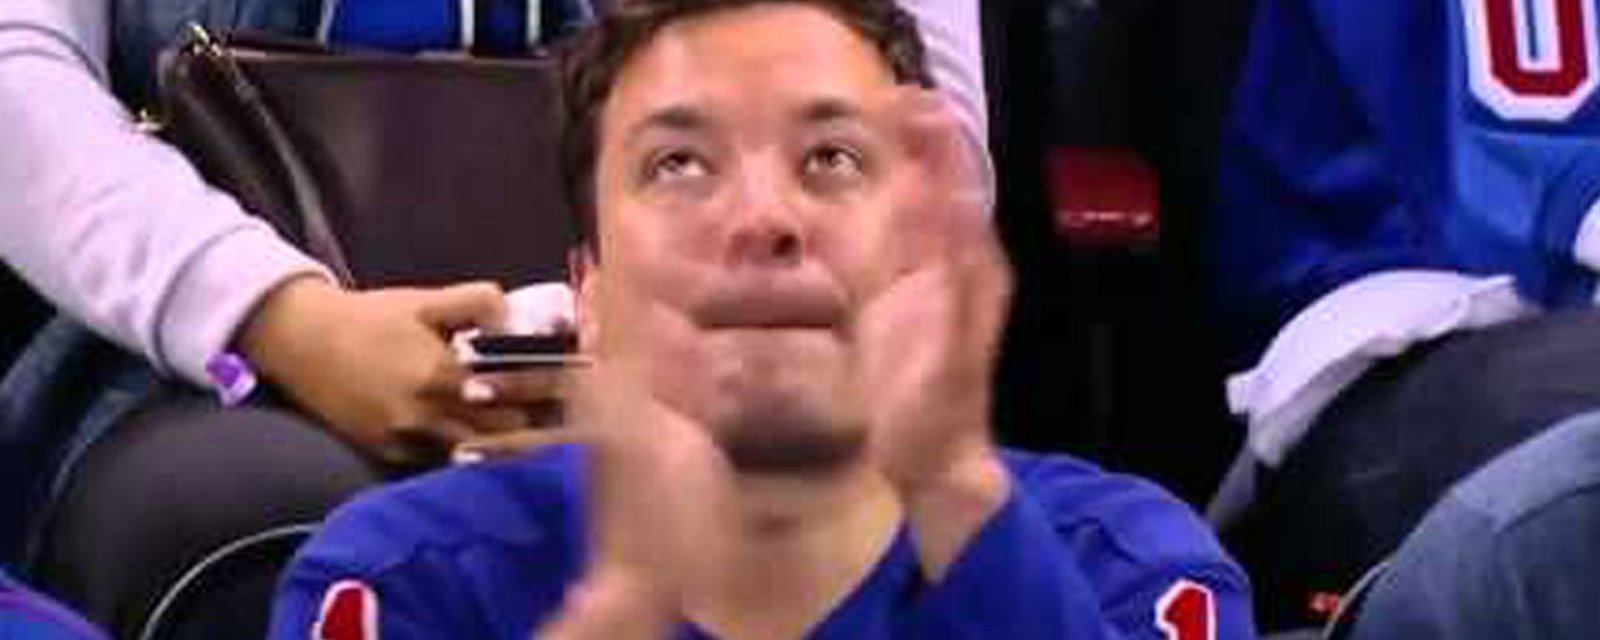 Jimmy Fallon betrayed his beloved Rangers on Tuesday night!